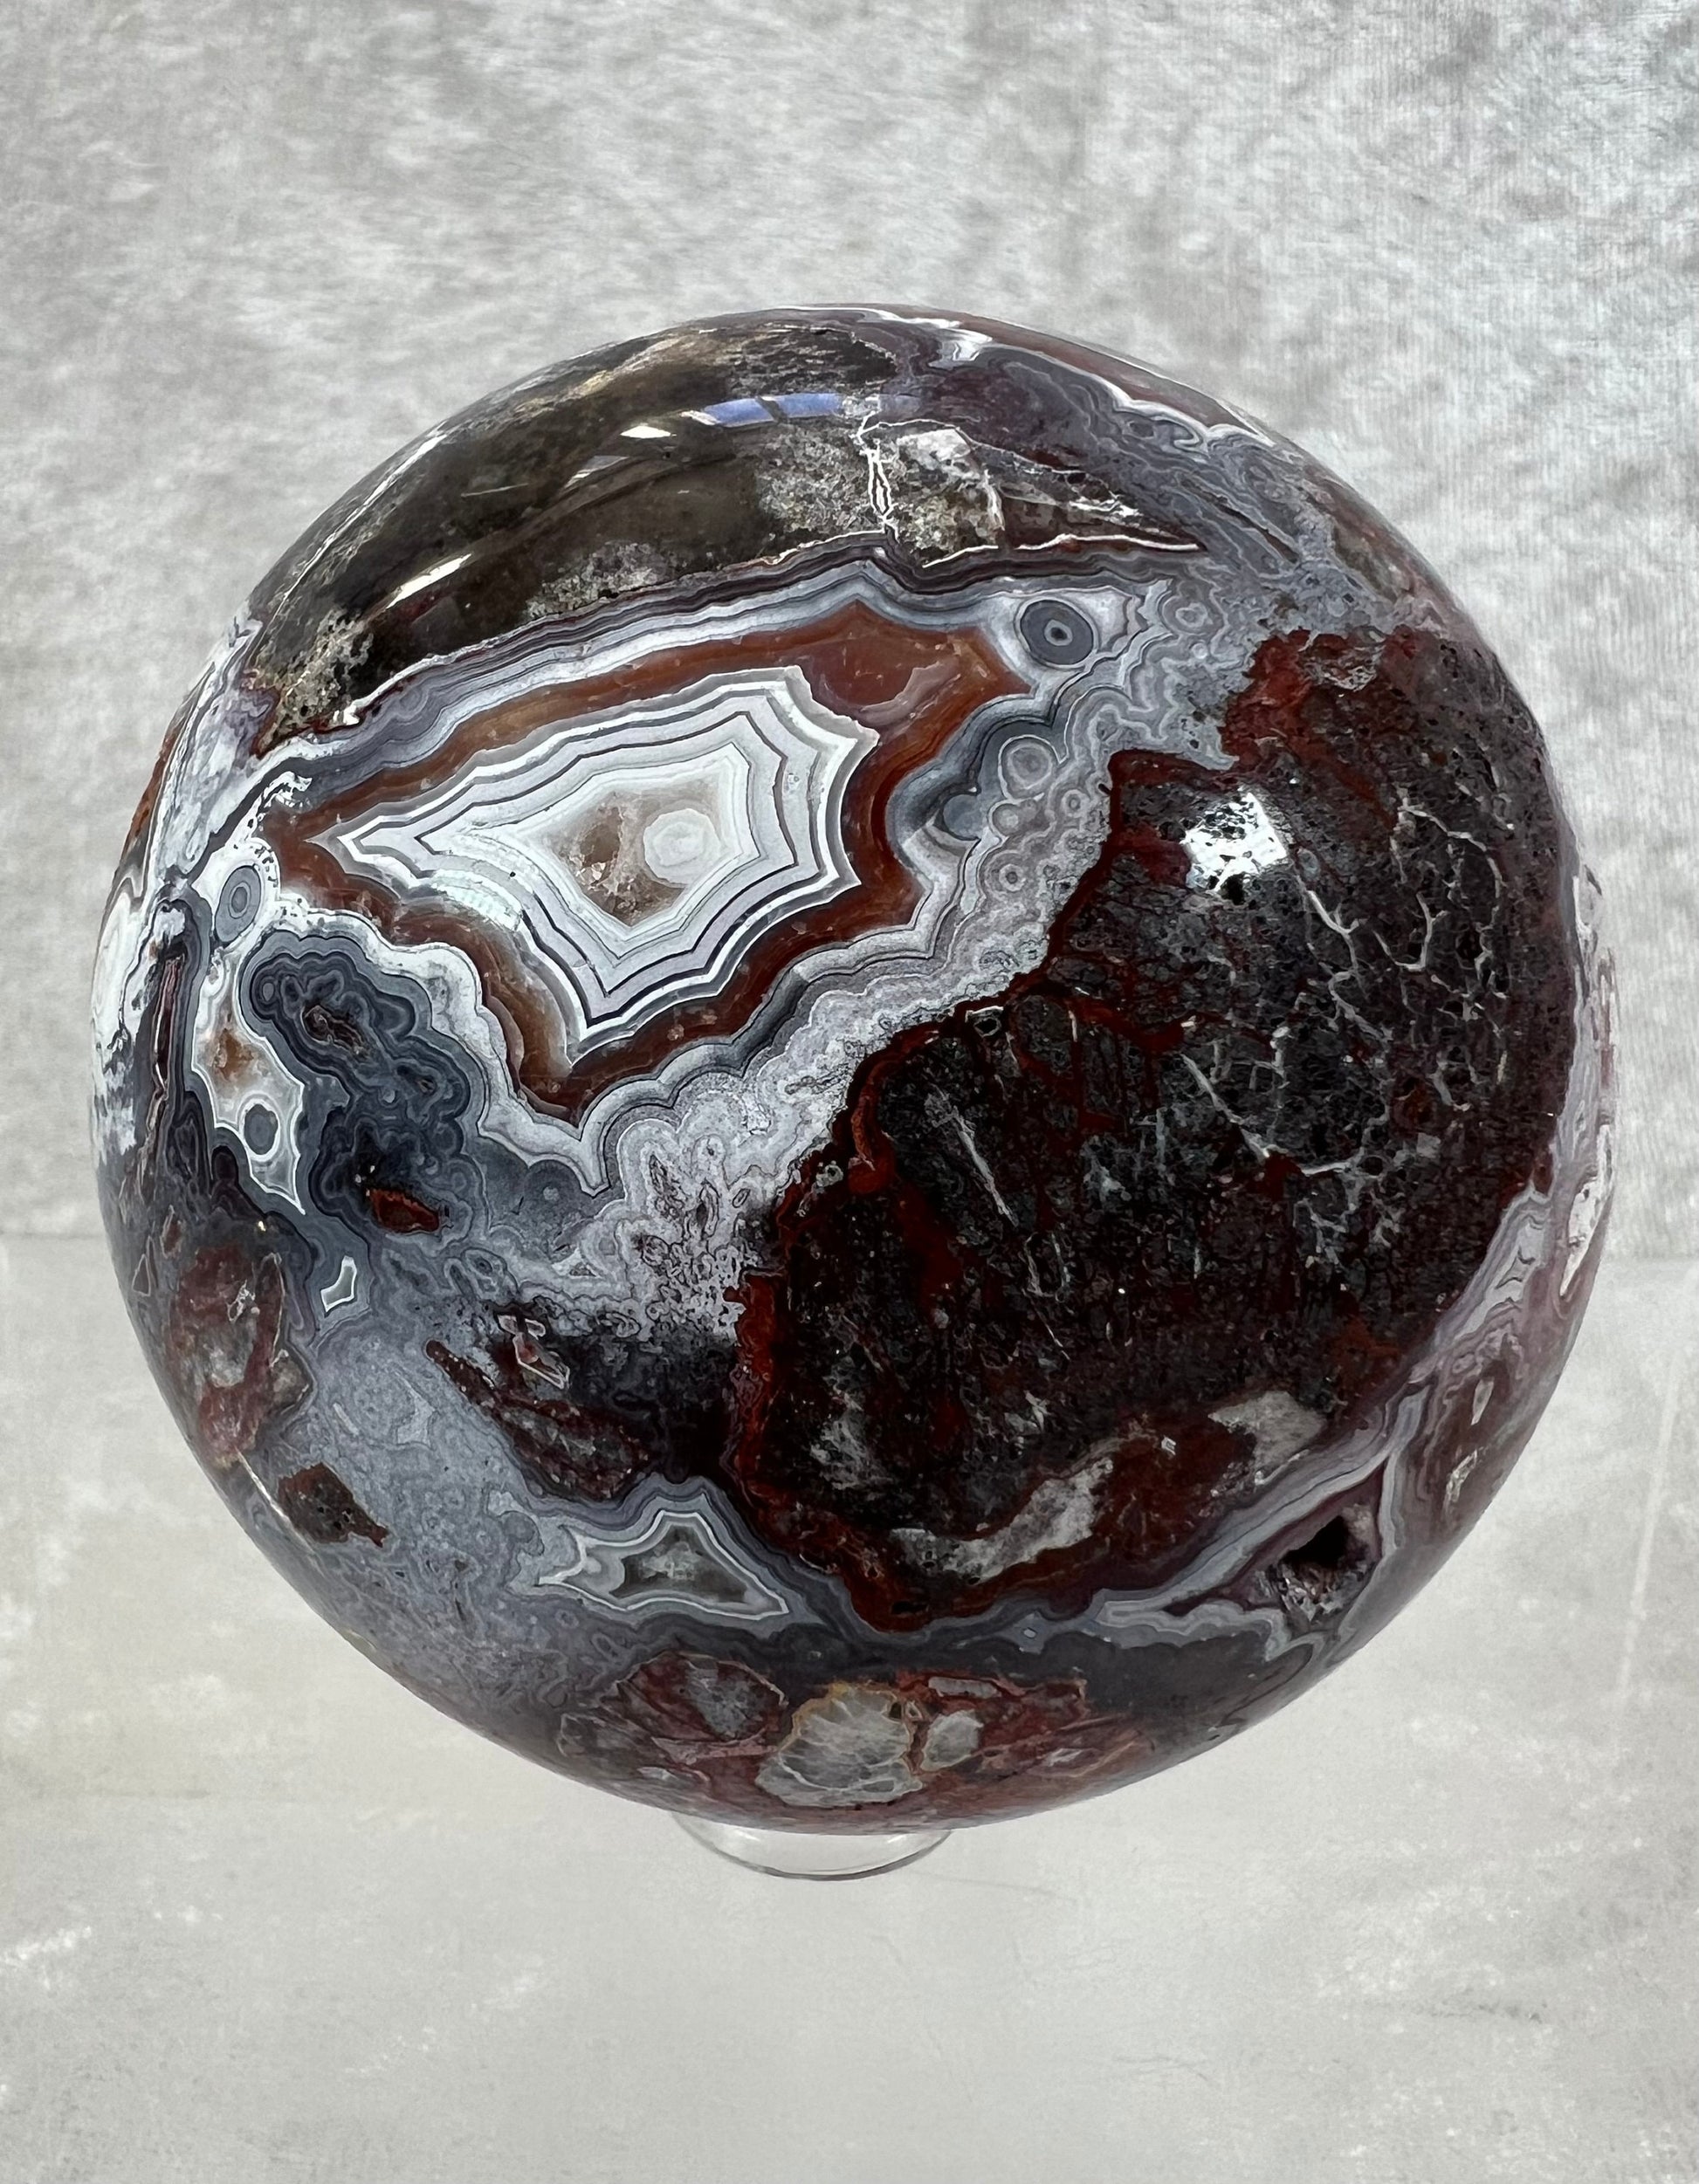 Amazing Mexican Crazy Lace Agate Sphere. 68mm. High Quality With Great Lacing. Beautiful Crystal Sphere